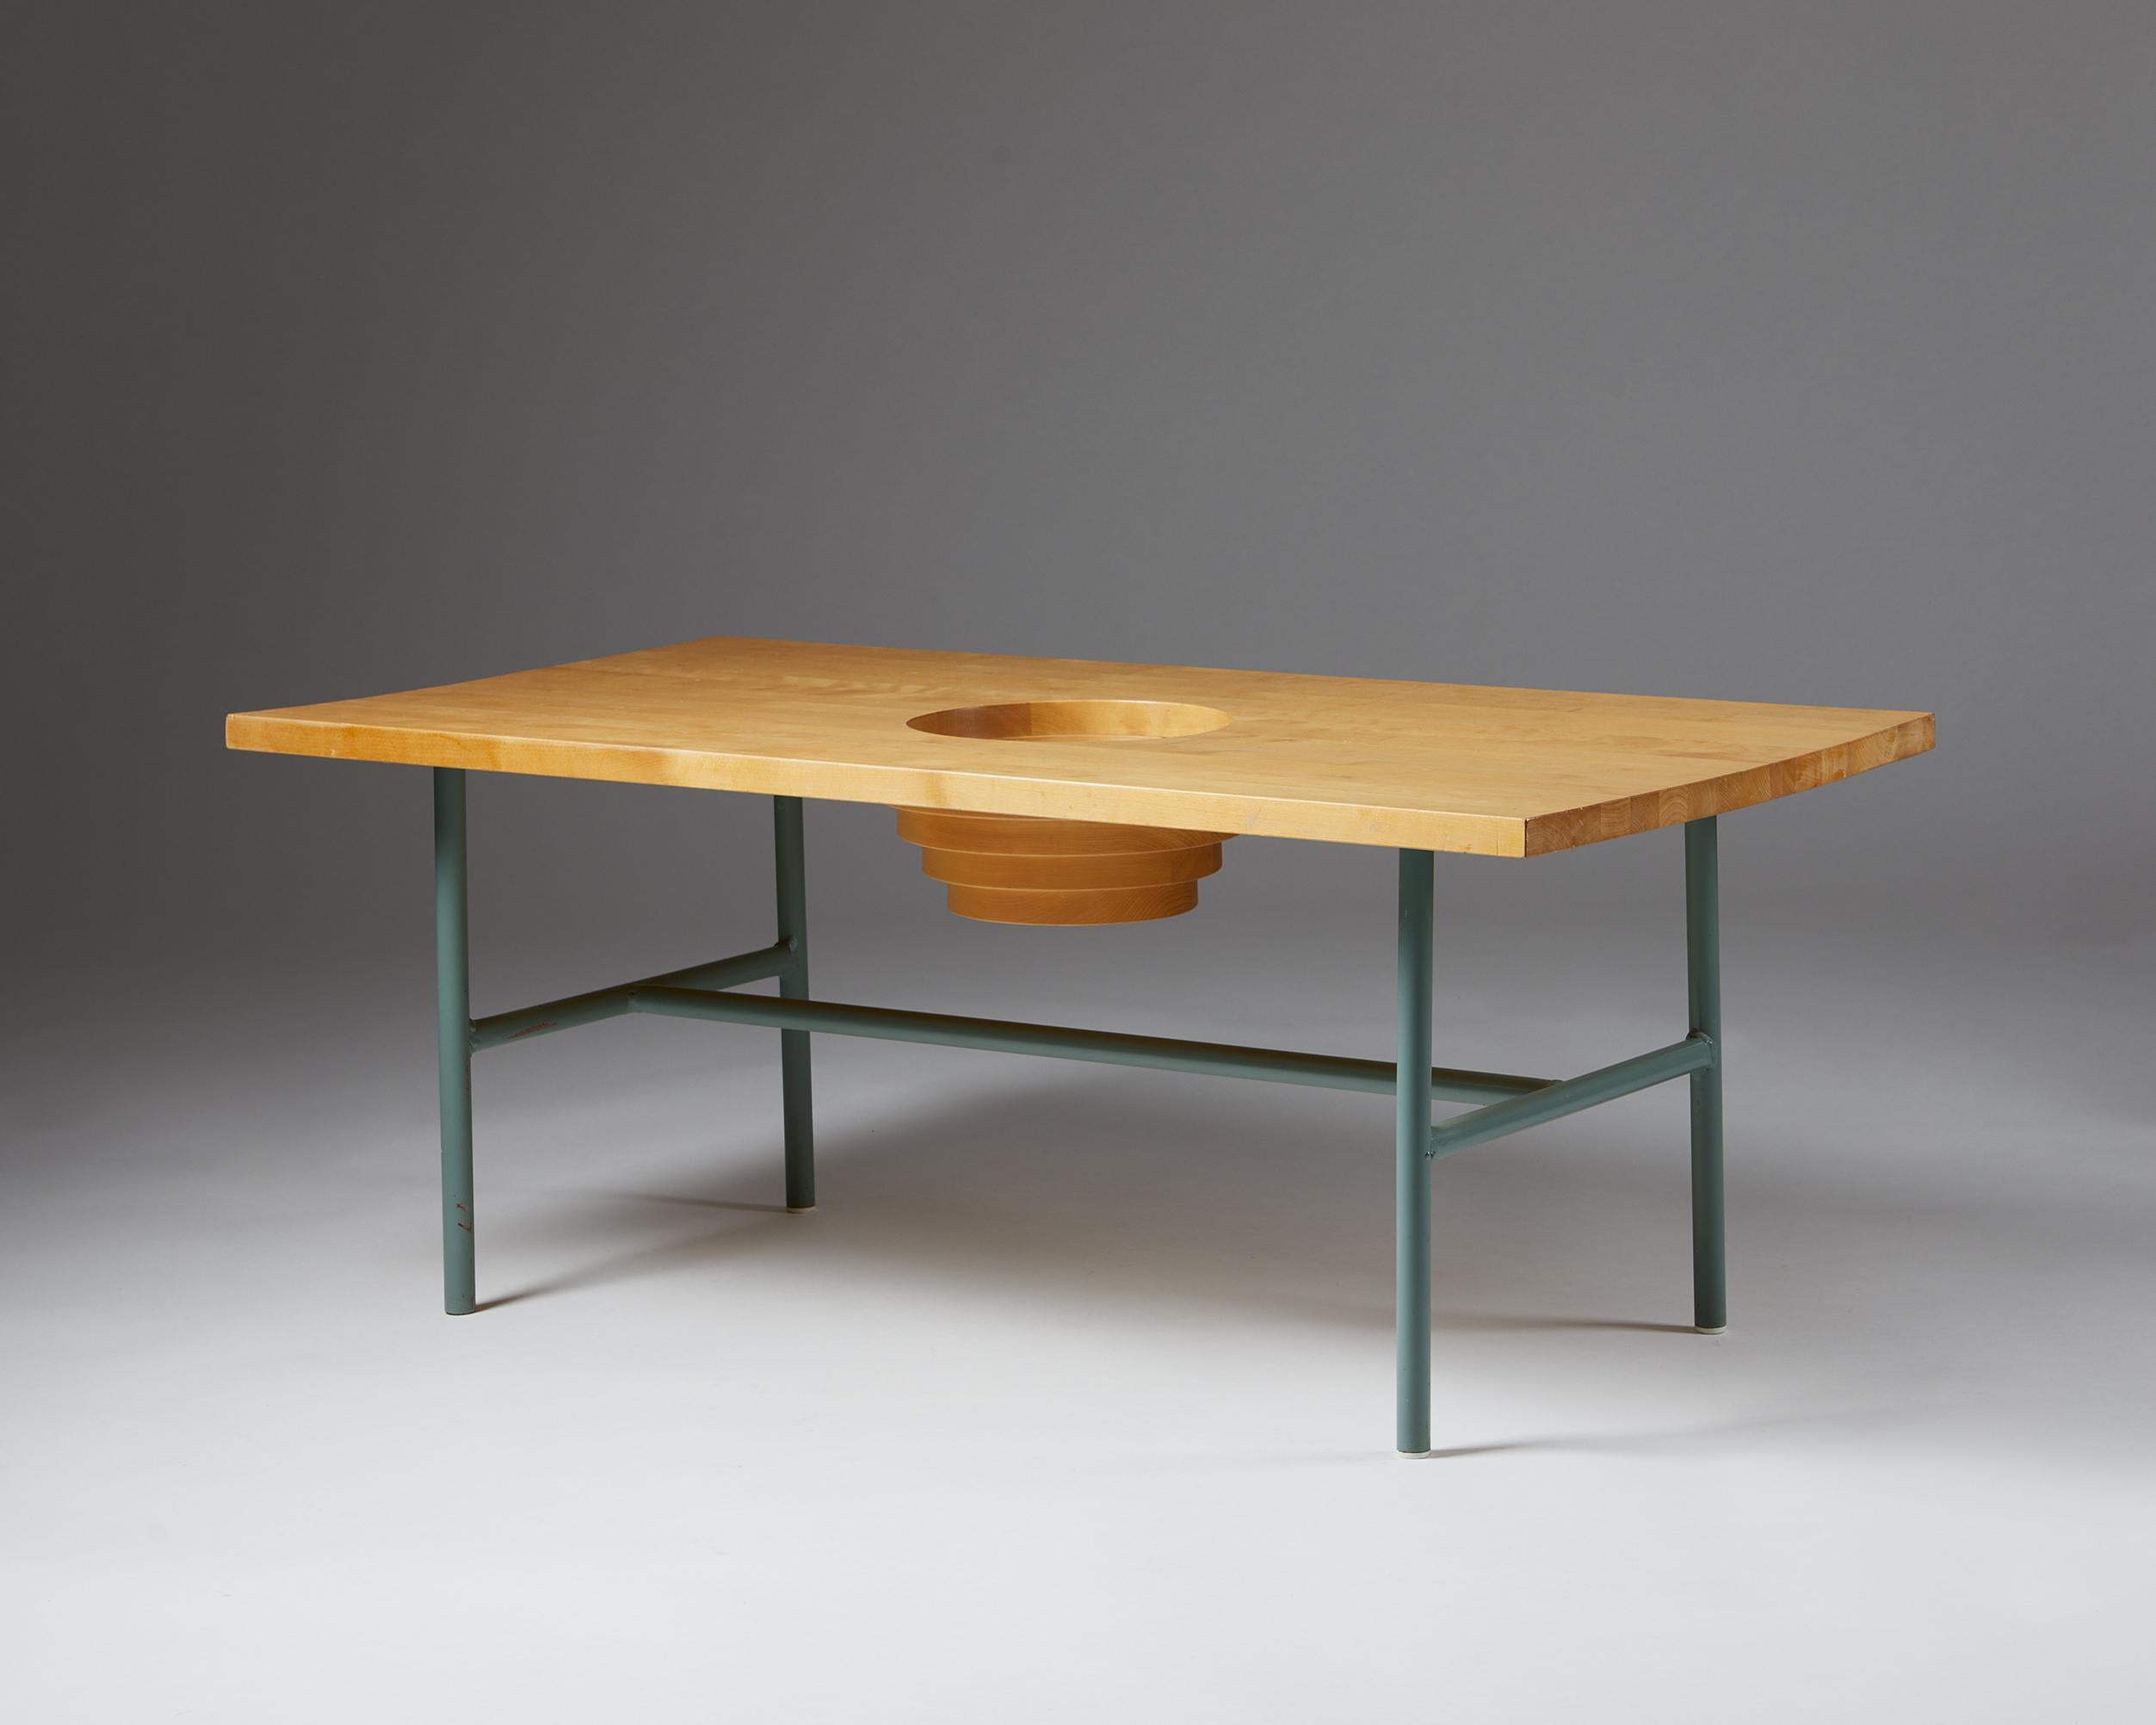 Occasional table designed by Thomas Sandell for Asplund,
Sweden, 1990s.

Birch and lacquered tubular steel.

Dimensions: 
H: 49 cm / 1' 7 1/4